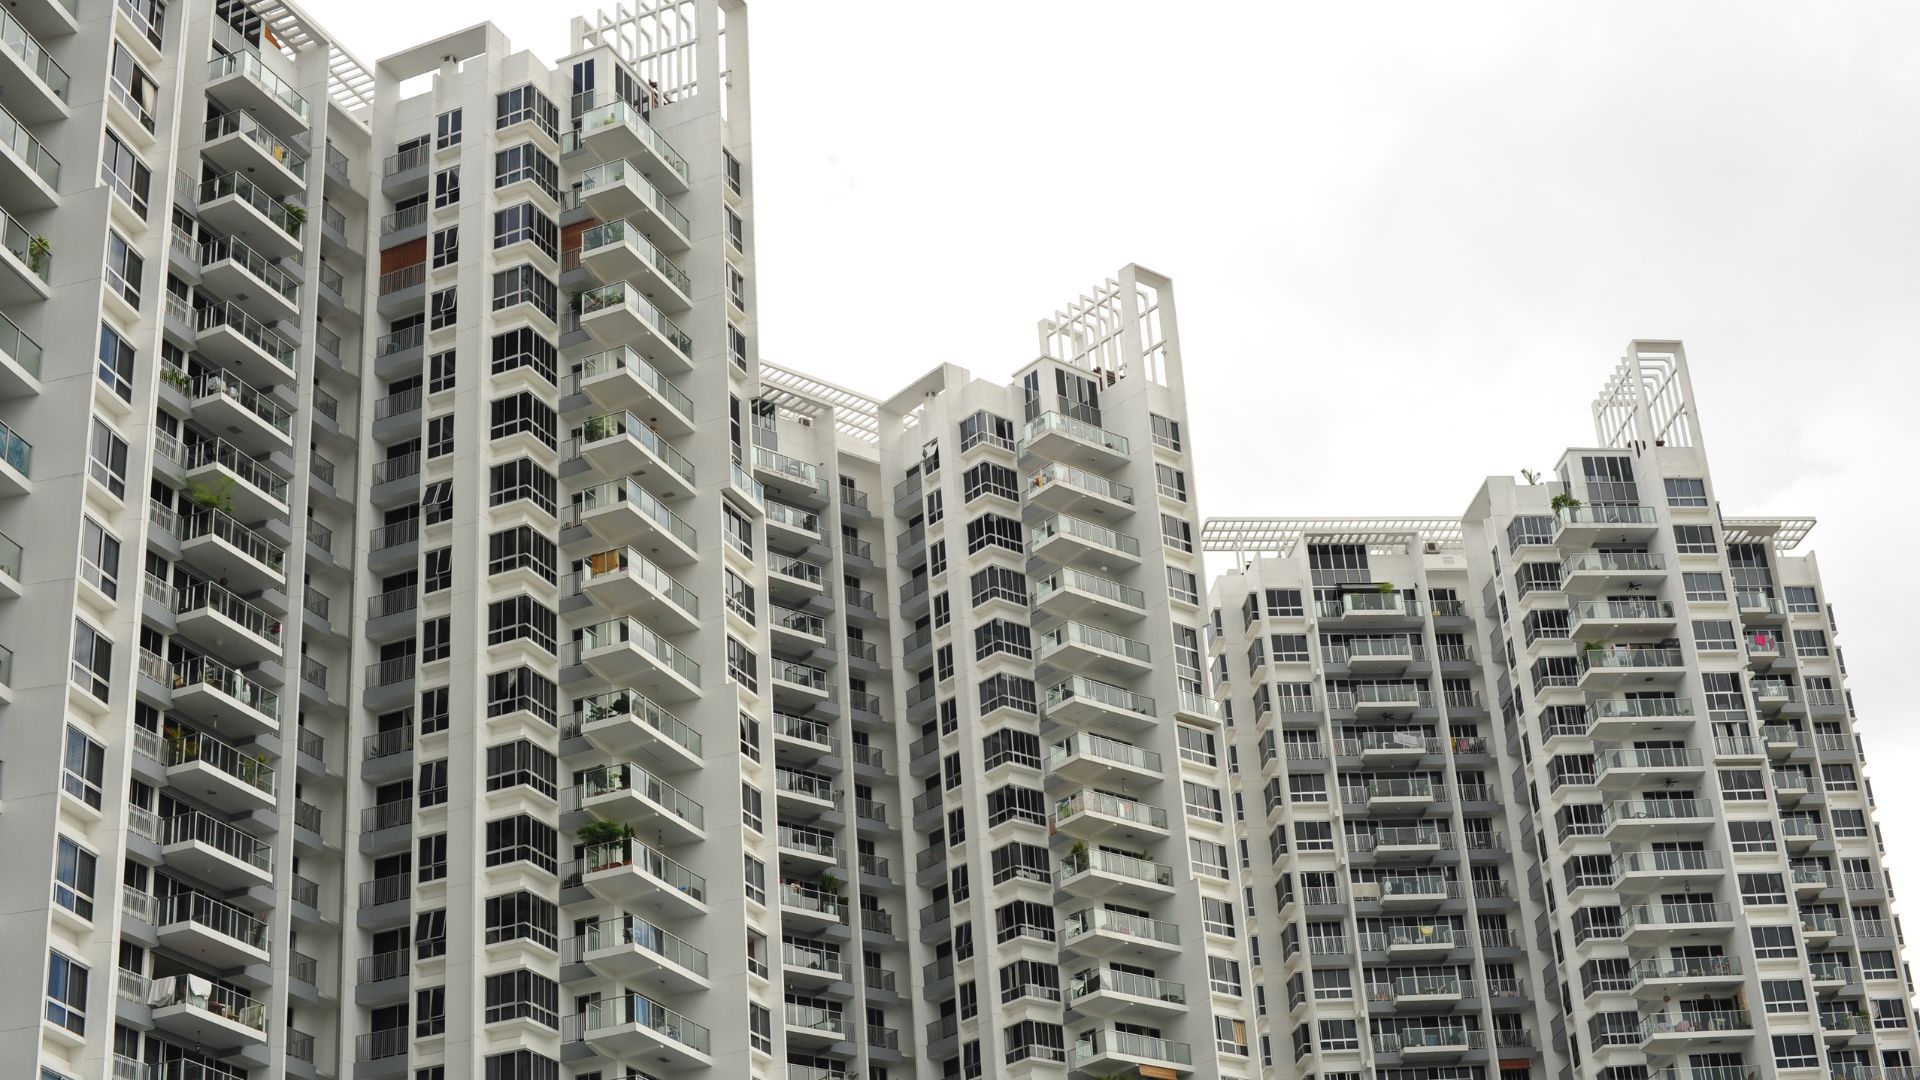 reason why HDB property’s taxes in Singapore keep rising is because the rental value and VC are rising.